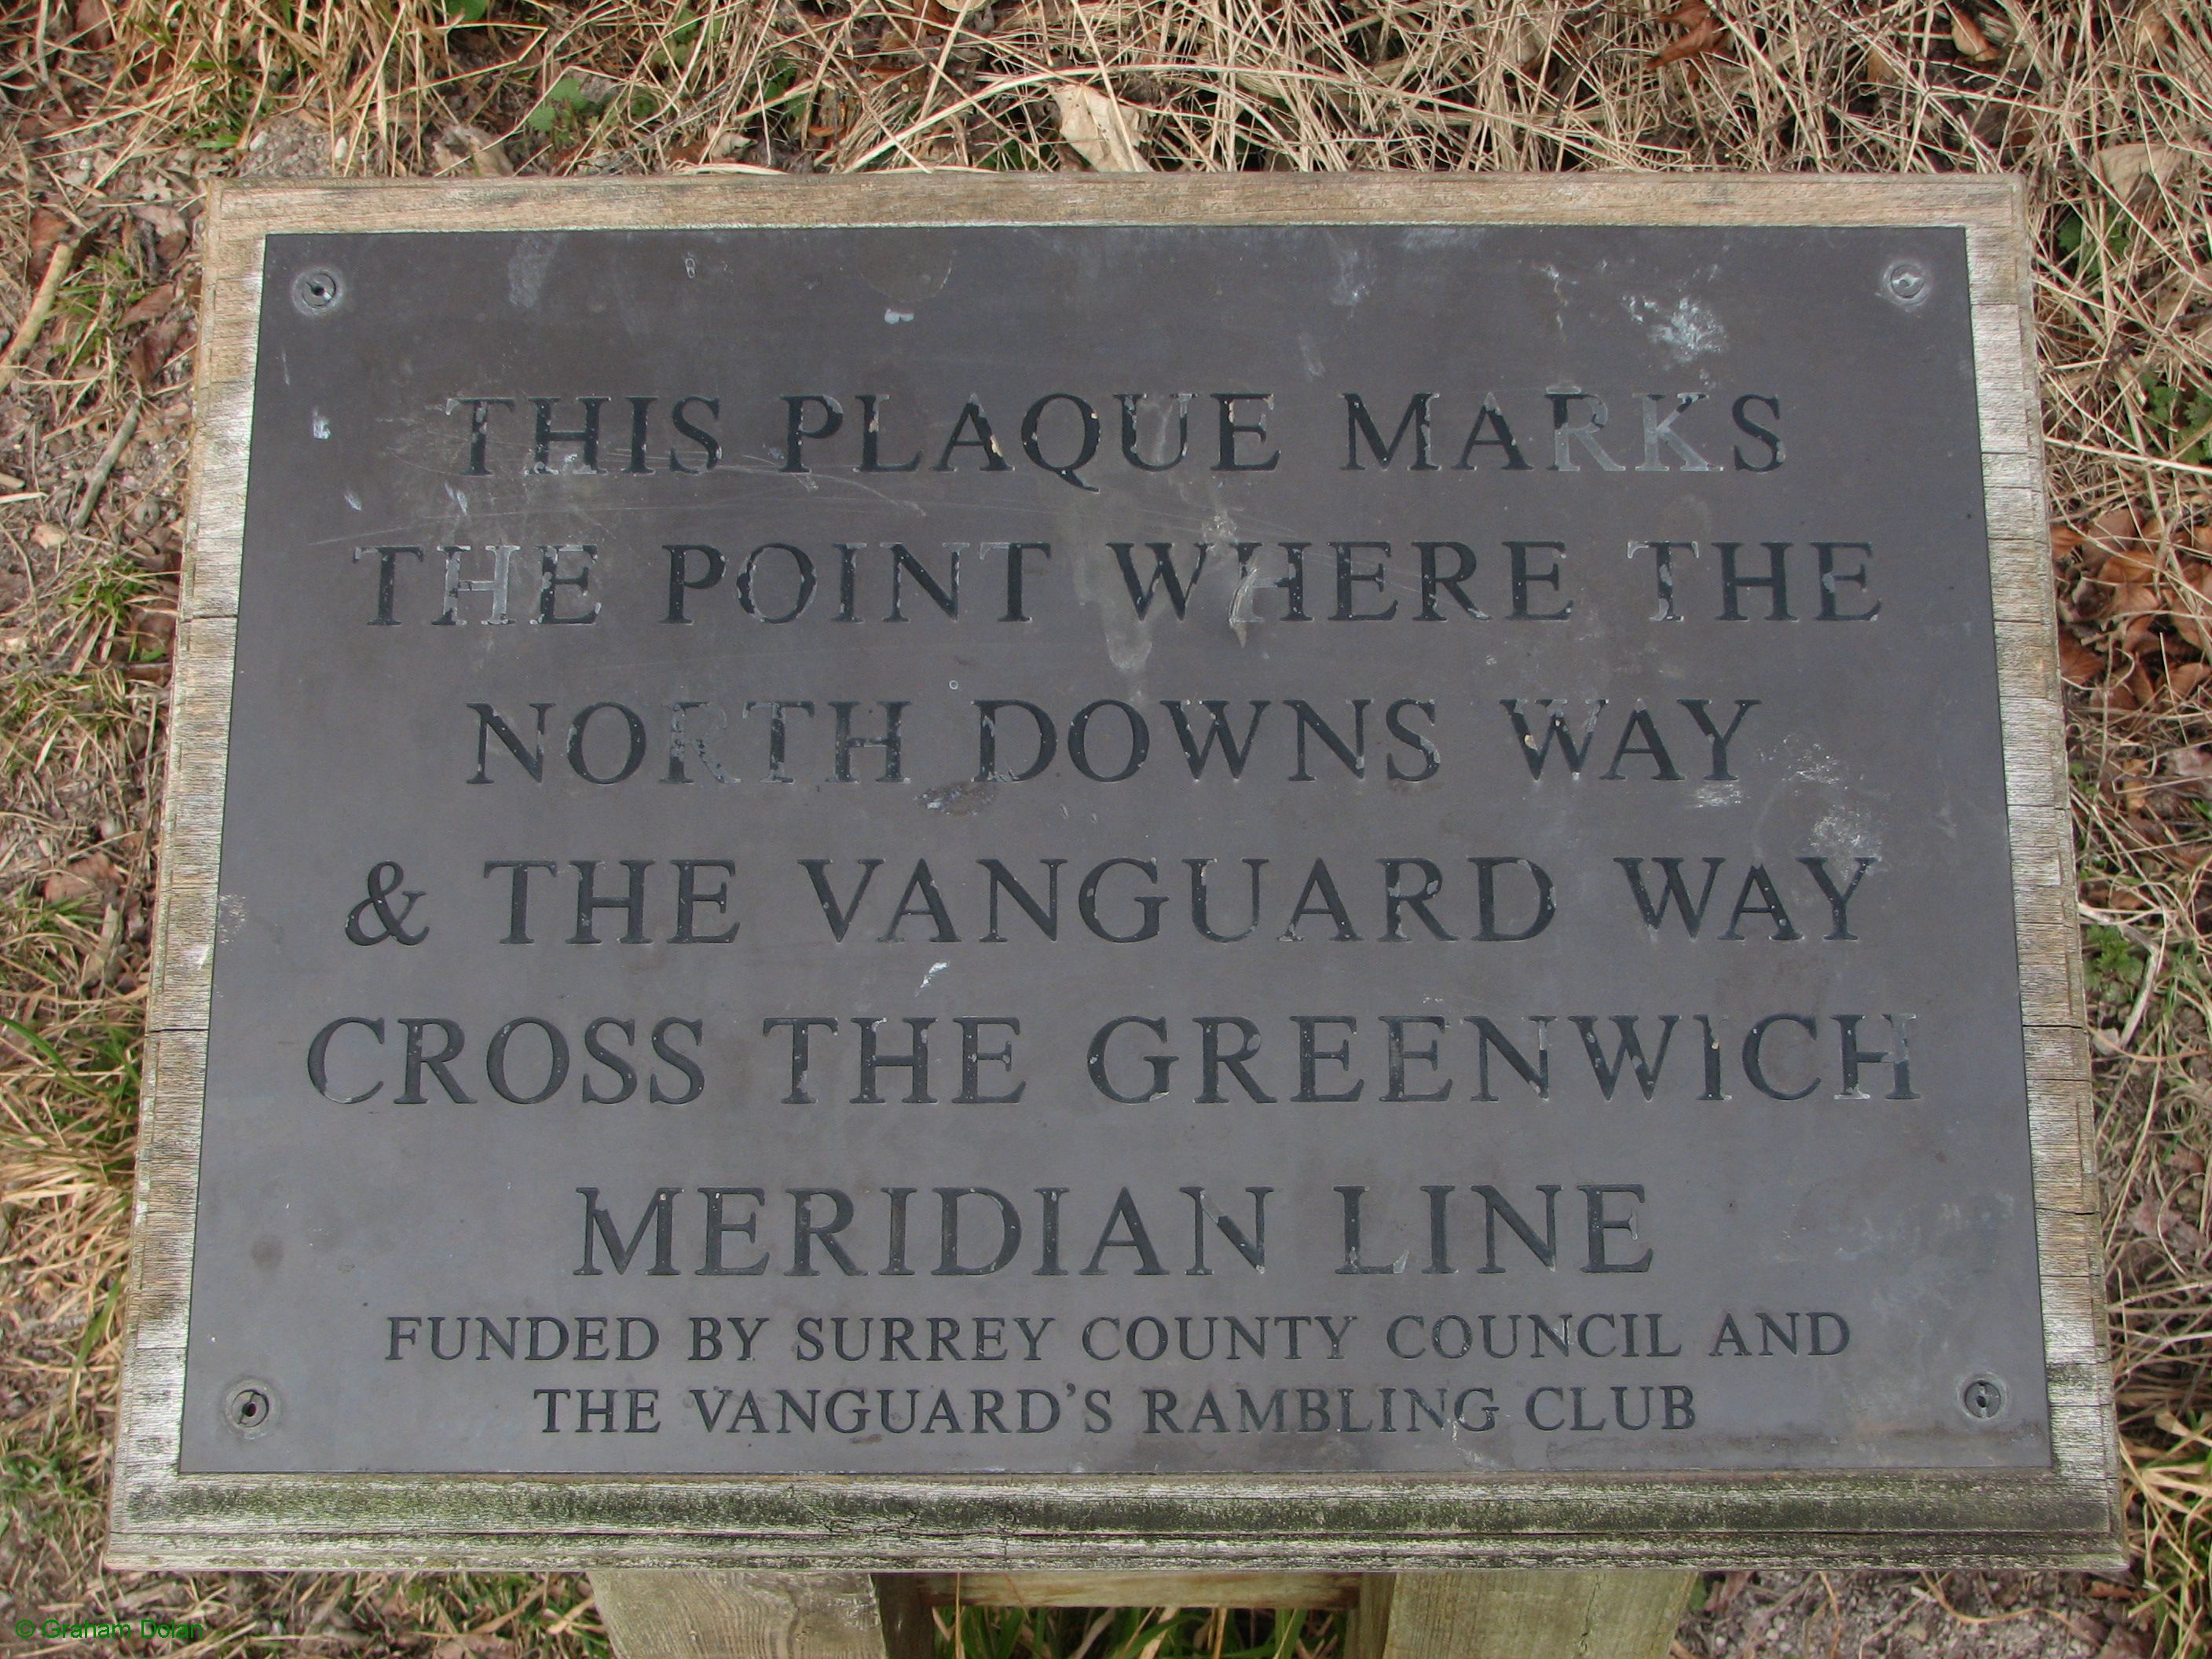 Greenwich Meridian Marker; England; Surrey; Oxted